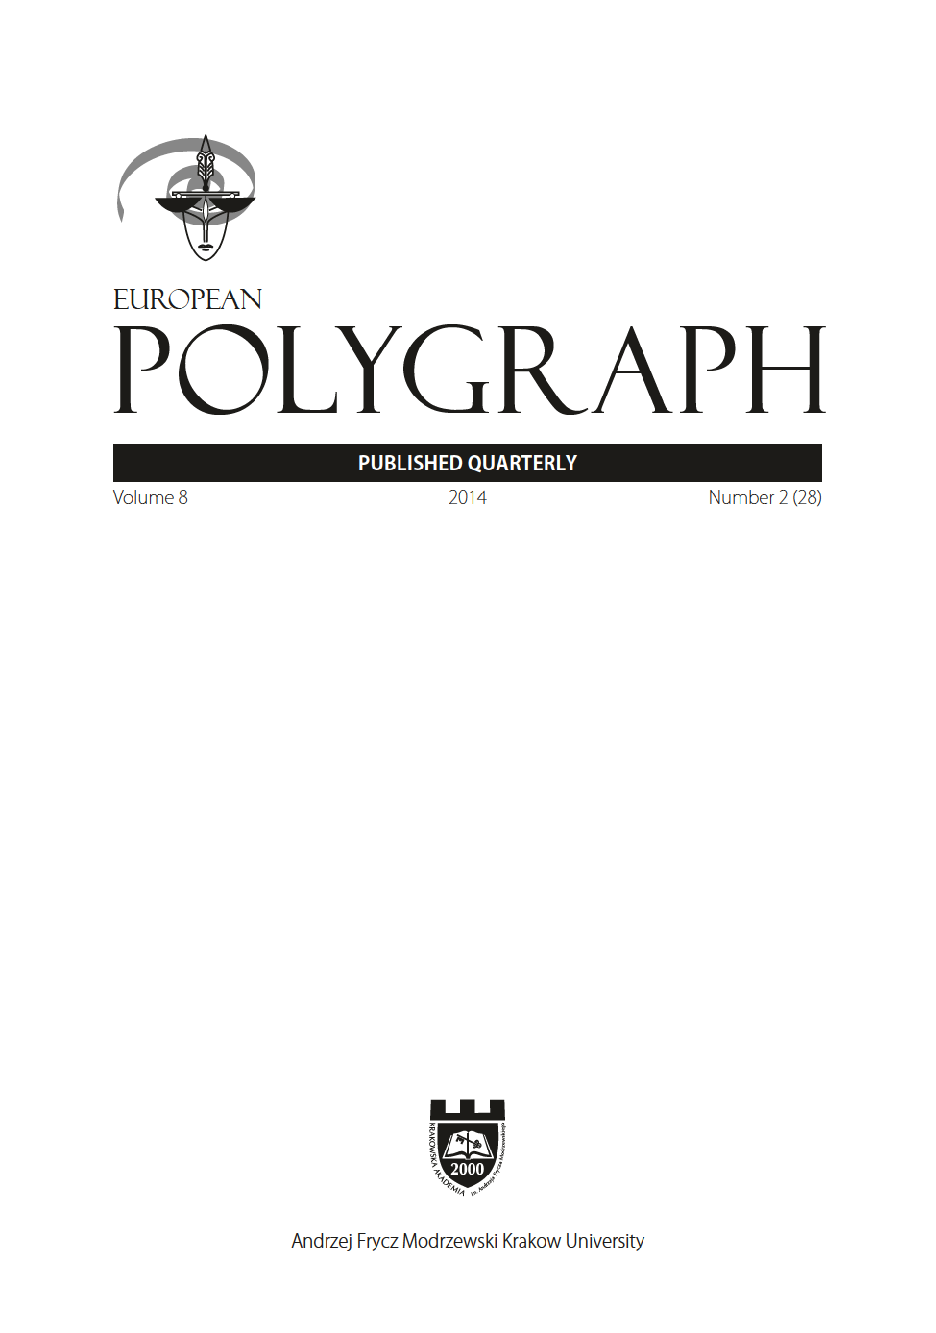 Polygraph Examination of Pregnant Women: Dilemmas and Recommendations